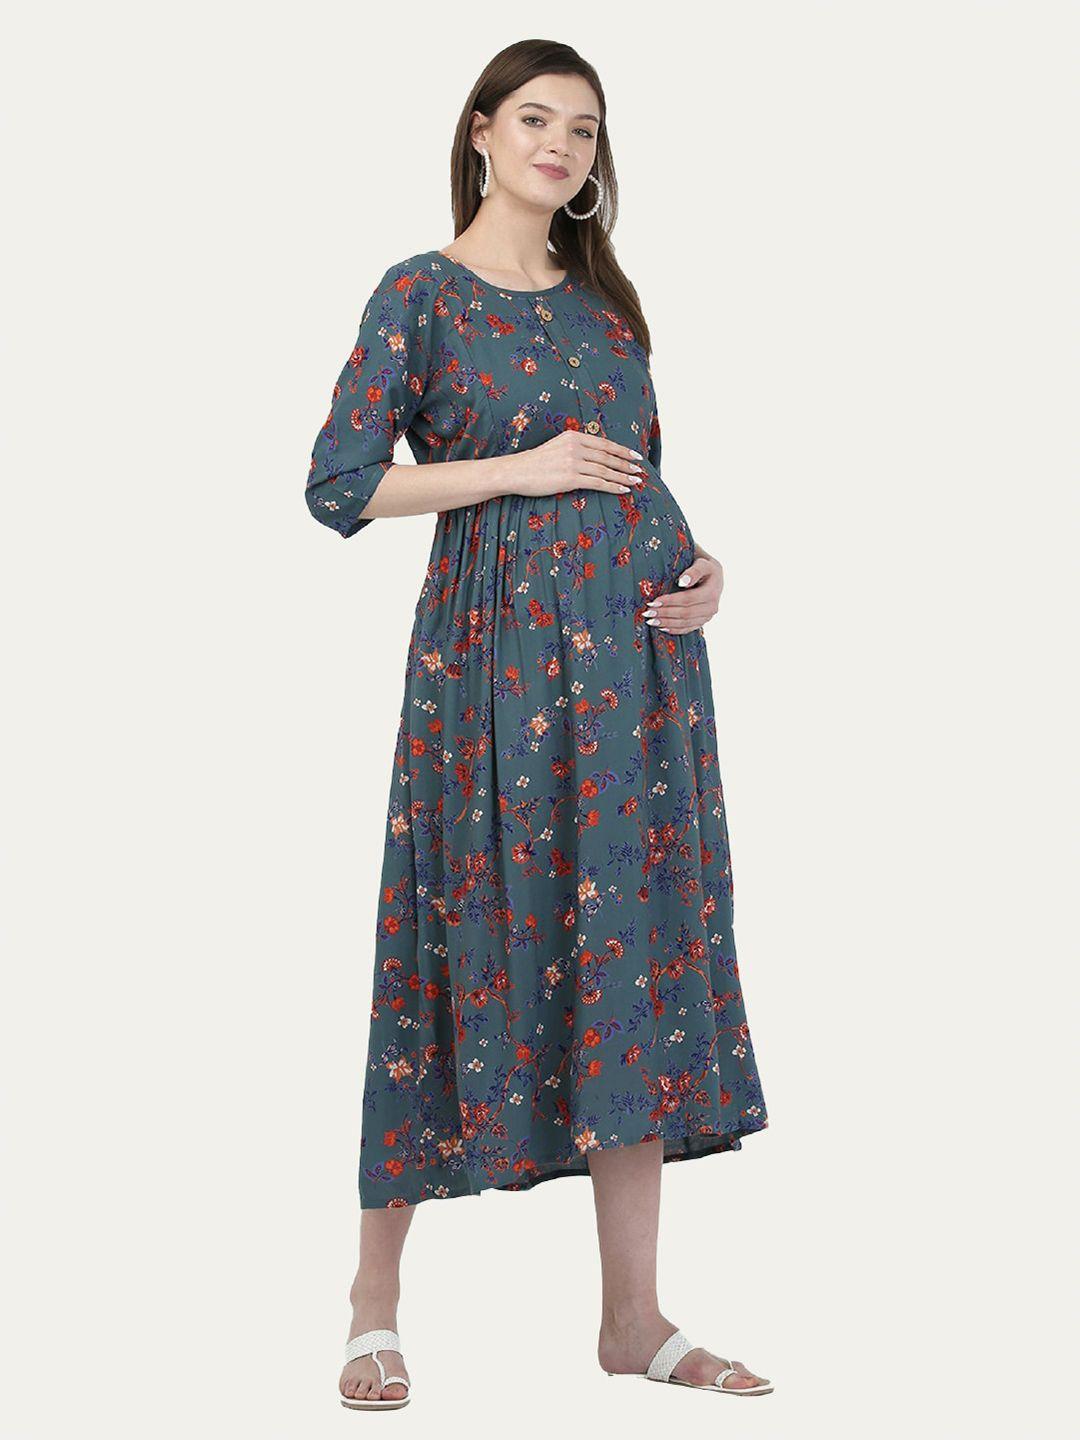 mylo essentials floral printed maternity a-line dress with zipper